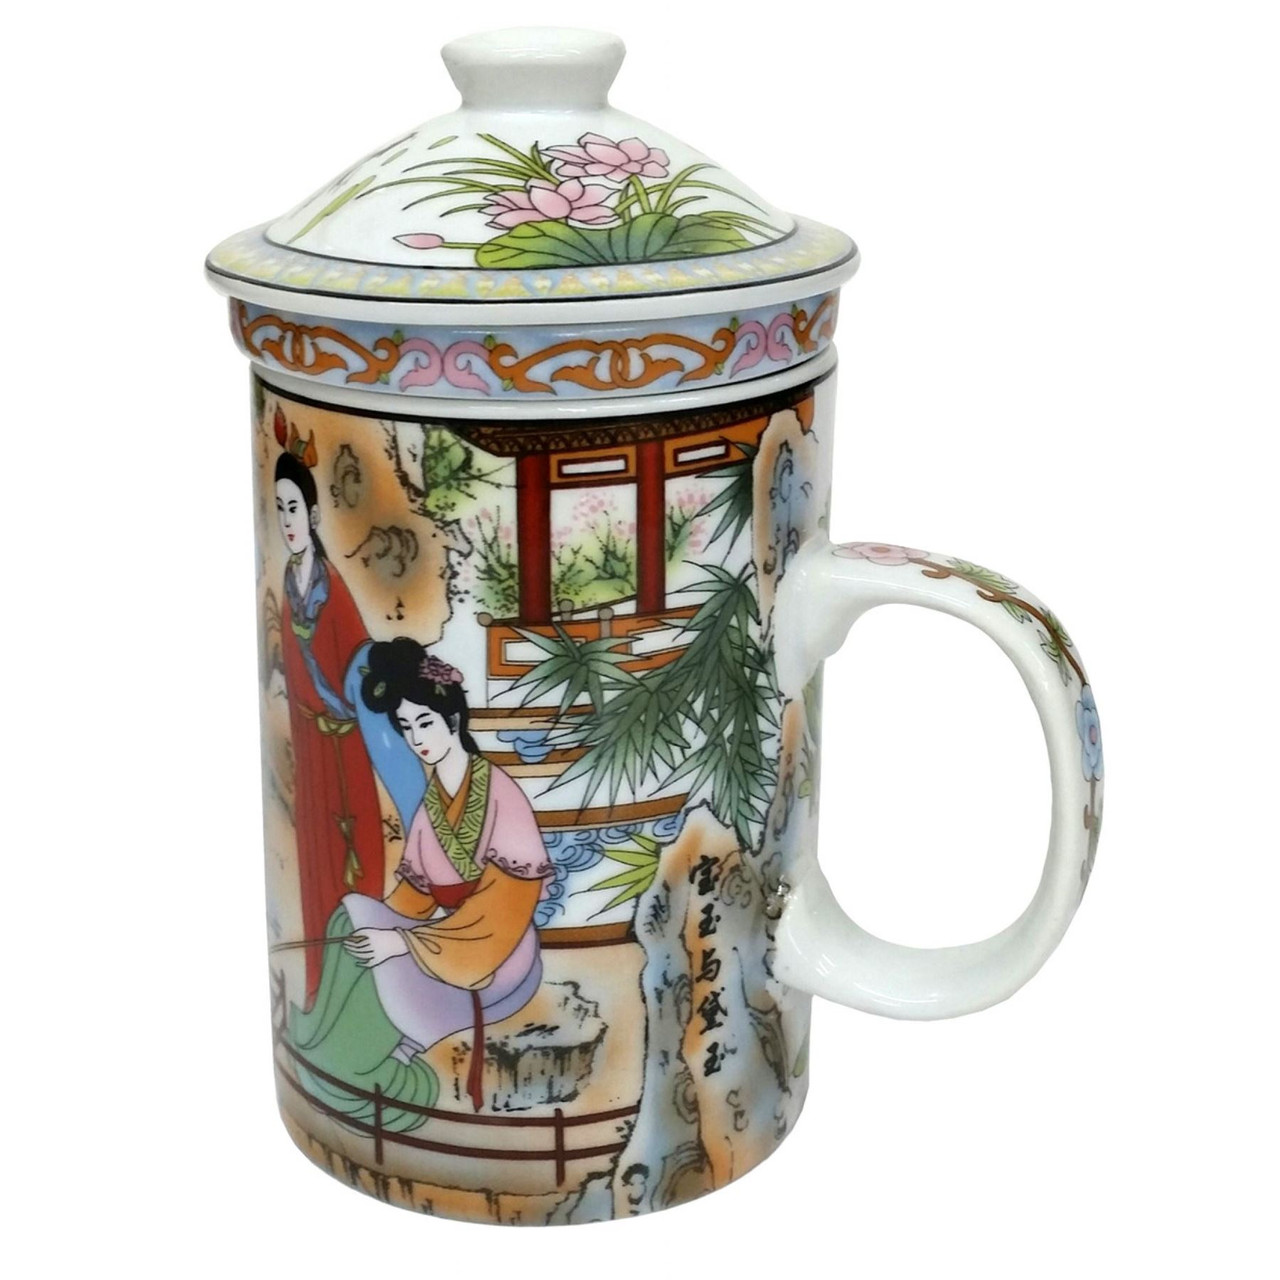 Porcelain Chinese Tea Mug with Infuser and Lid - Bao Yu Pattern.